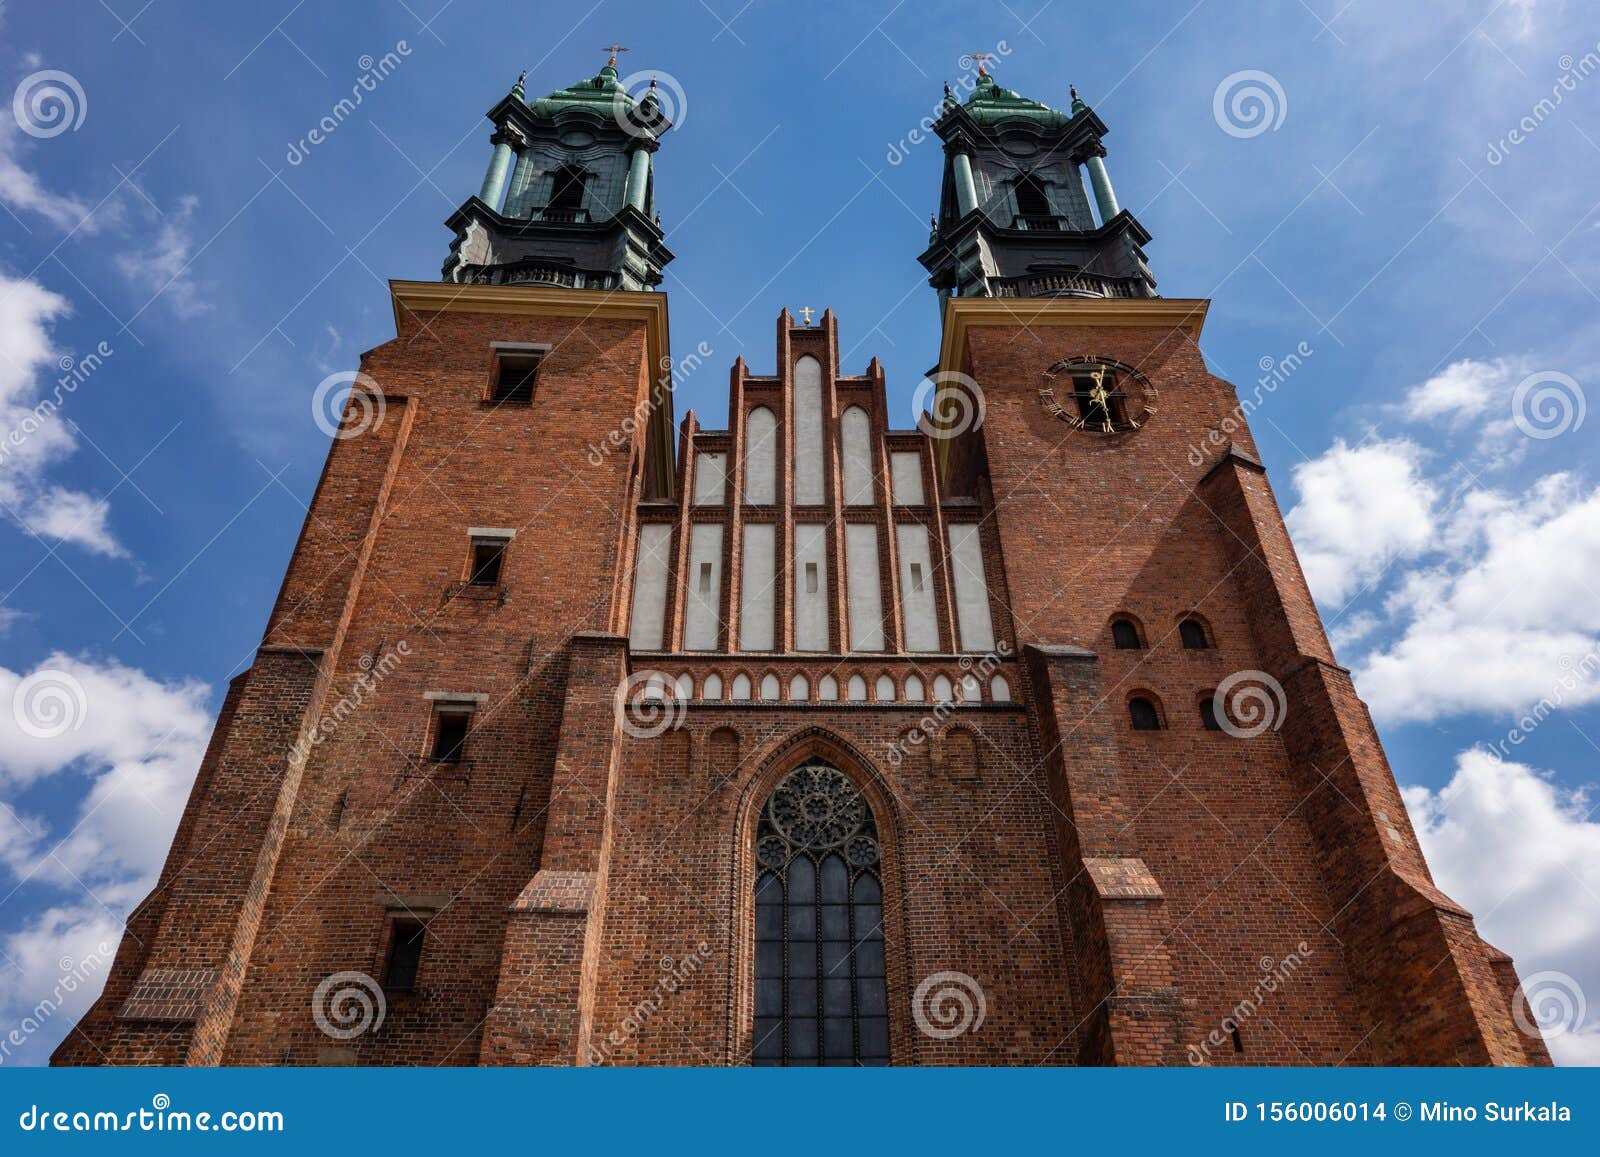 the red brick building of cathedral of saint peter and paul bazylika archikatedralna pw. sw. apostolow piotra i pawla in poznan